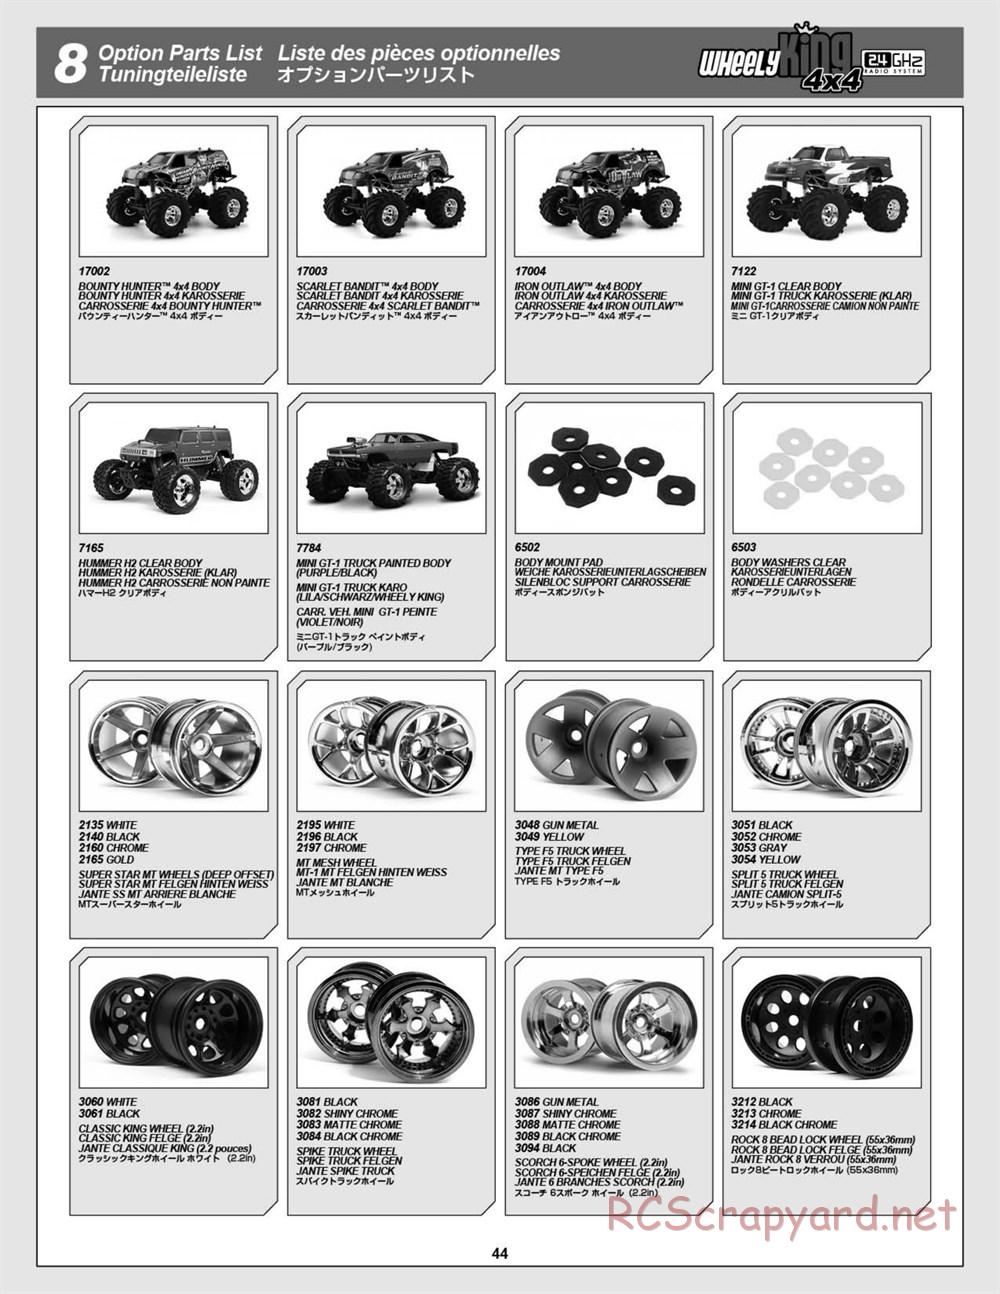 HPI - Wheely King 4x4 - Exploded View - Page 44